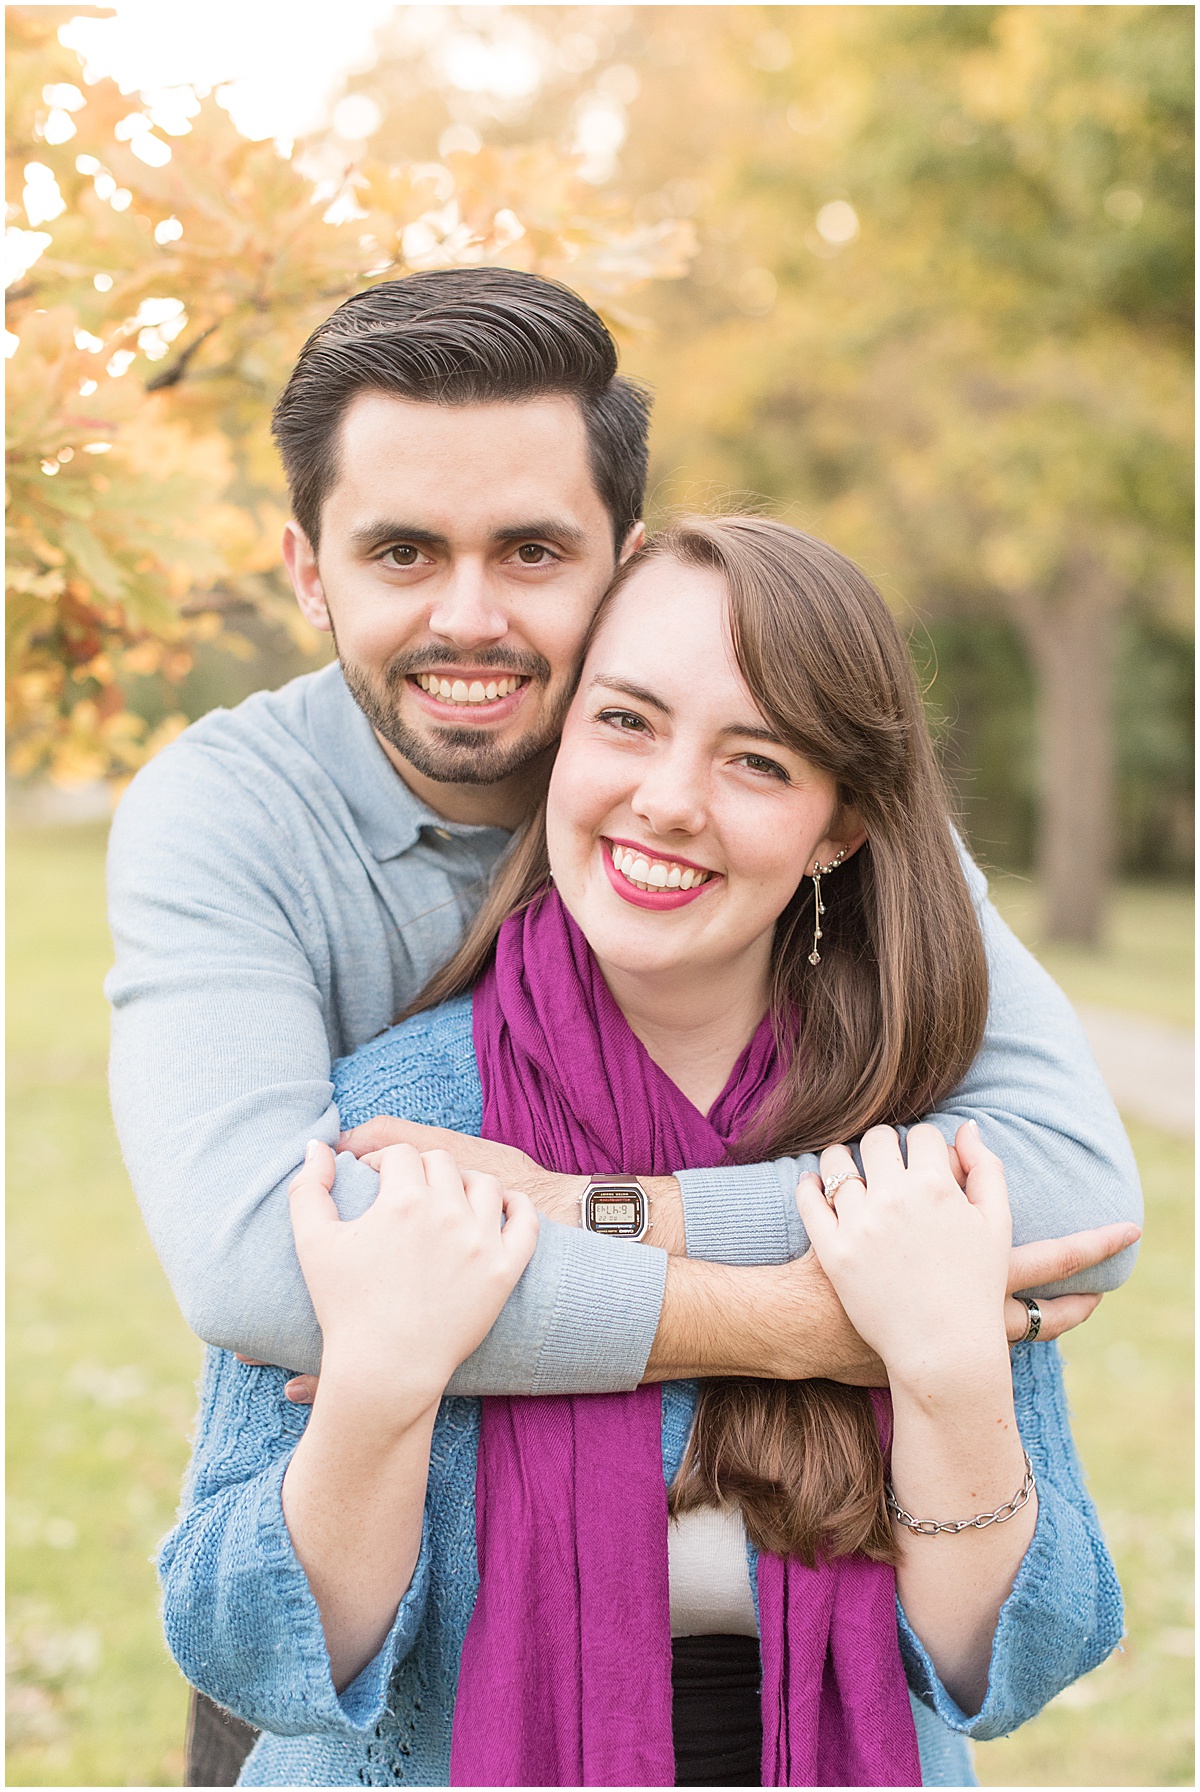 Nick Ballester and Madeline Pingel Engagement Session in Downtown Lafayette Indiana1.jpg